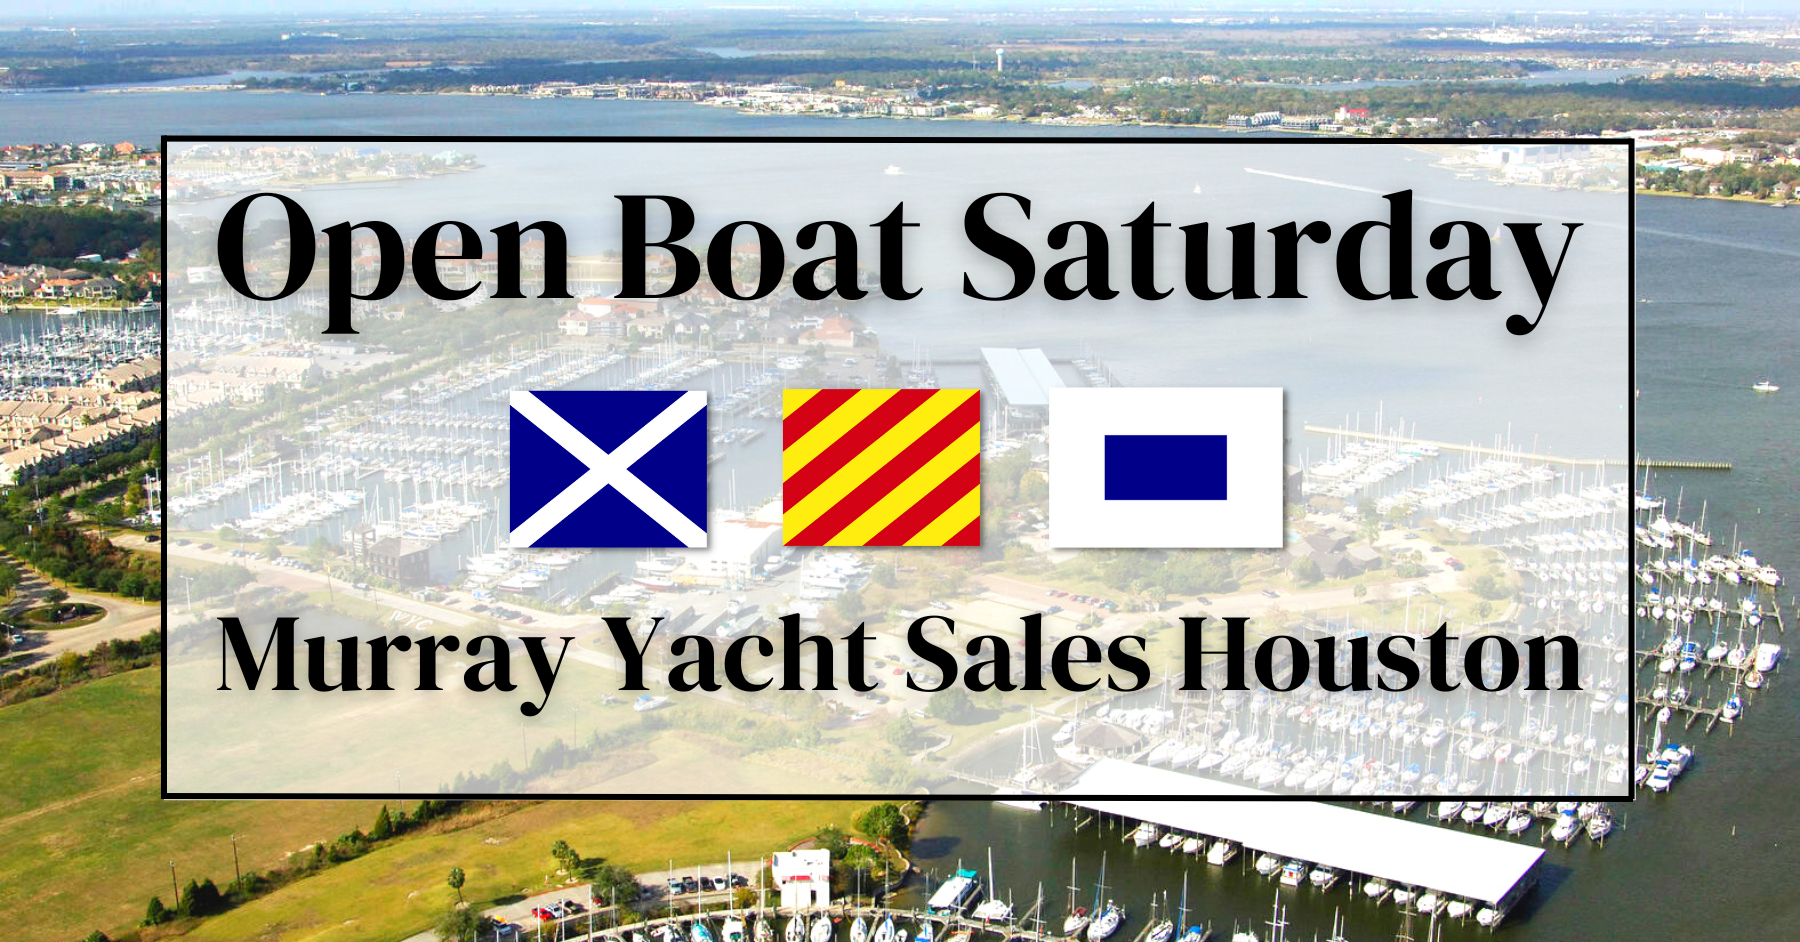 Open Boat, Boat Show, Sailboat, Yacht, Sales, Houston, Clear Lake, South Coast, Texas Coast, Little Yacht Sales